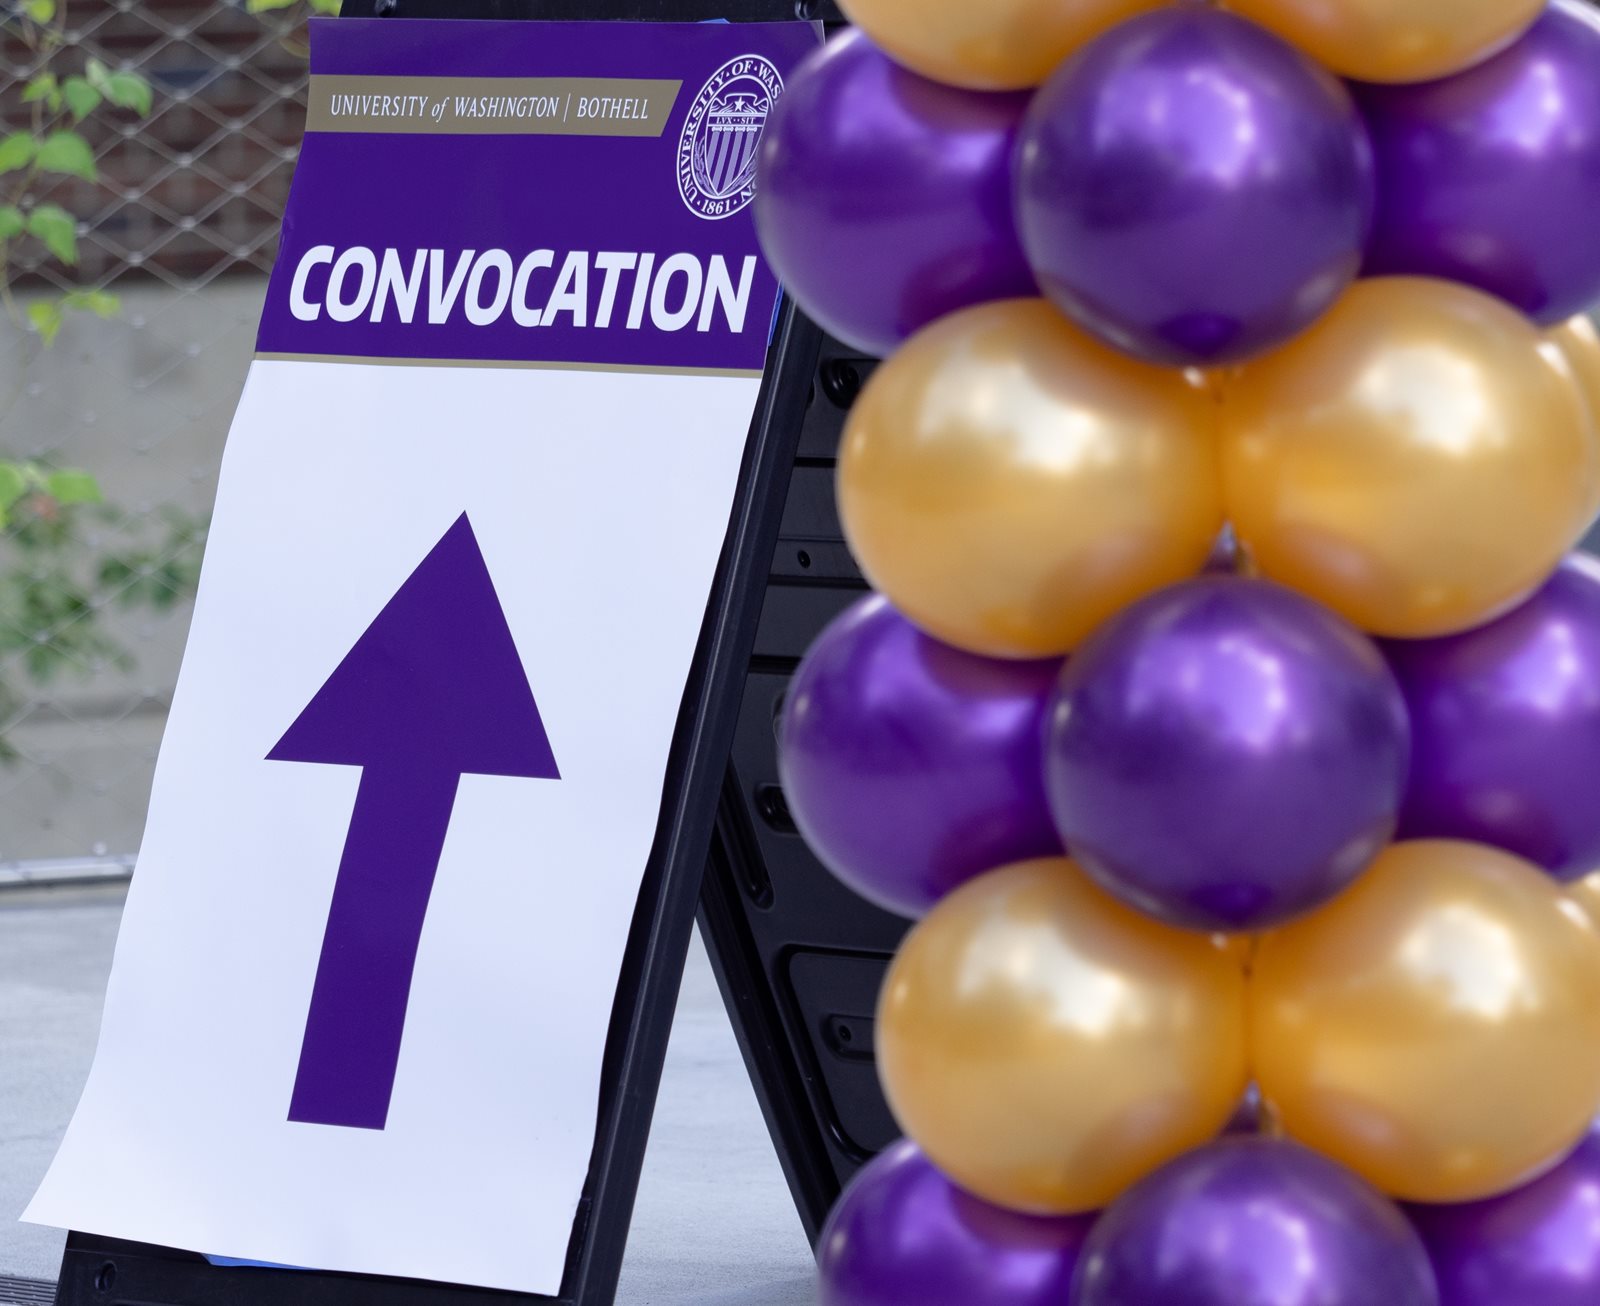 Convocation sign